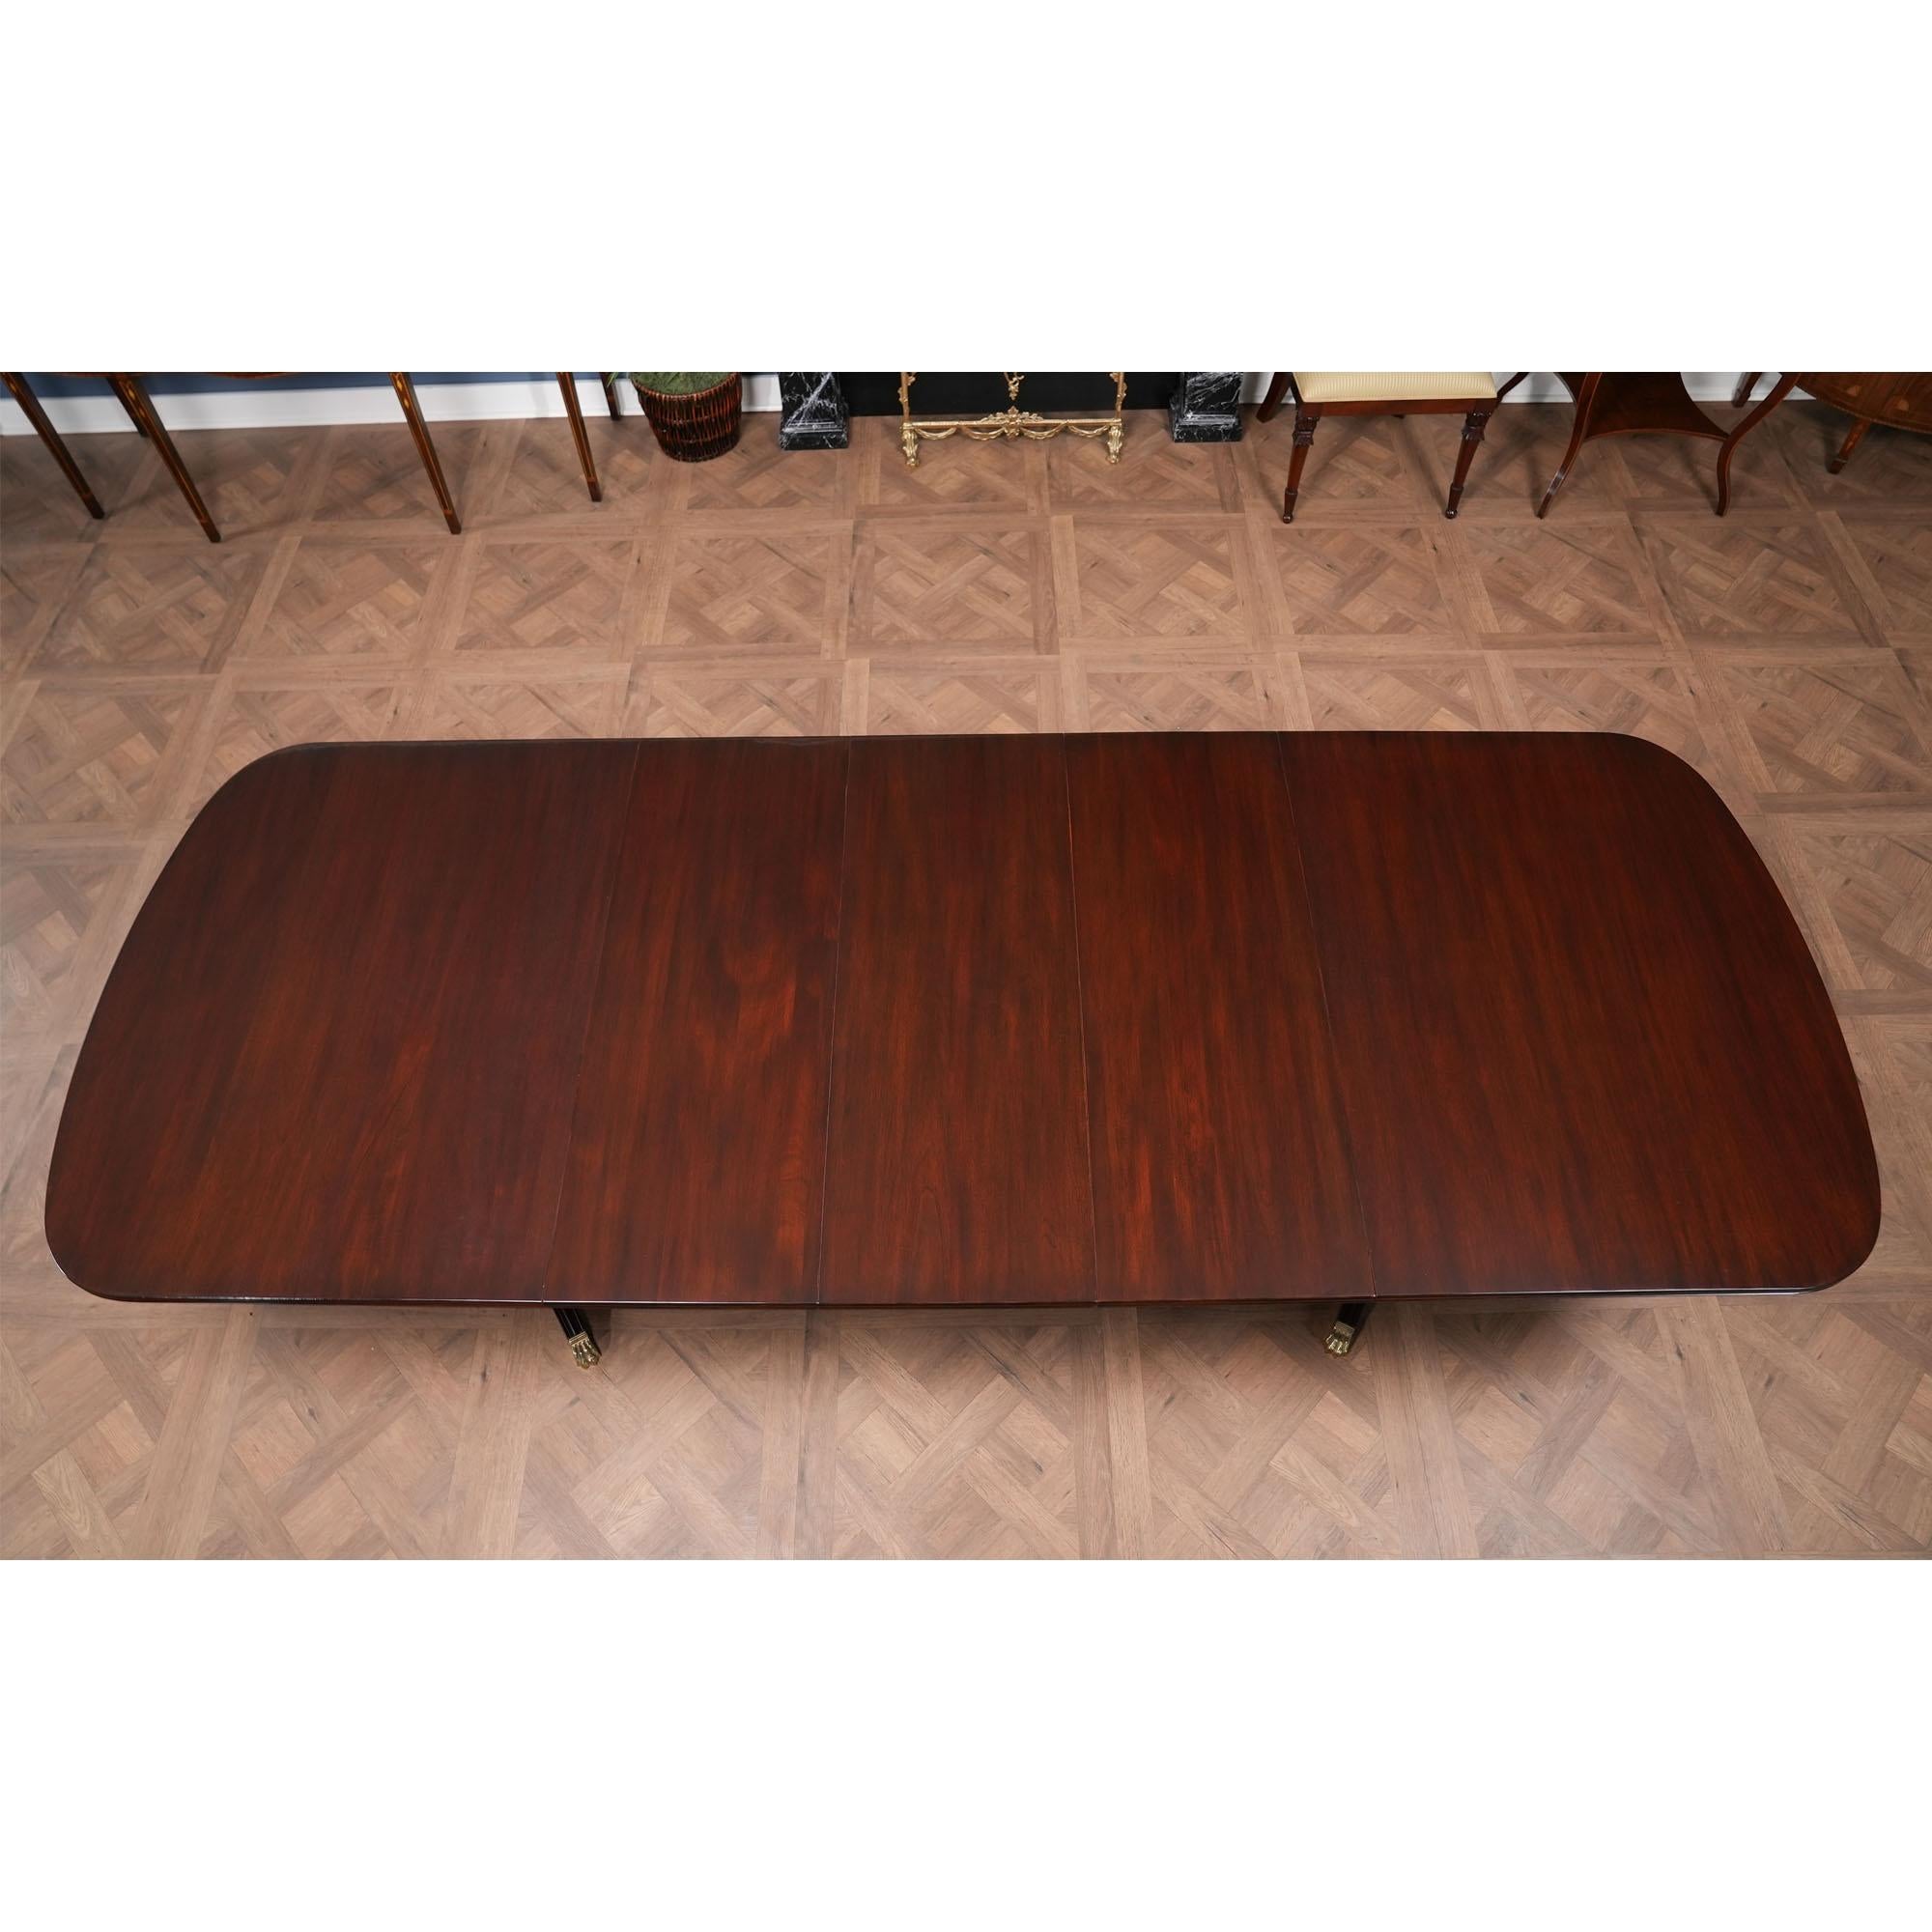 Vintage Henkel Harris Dining Table In Good Condition For Sale In Annville, PA